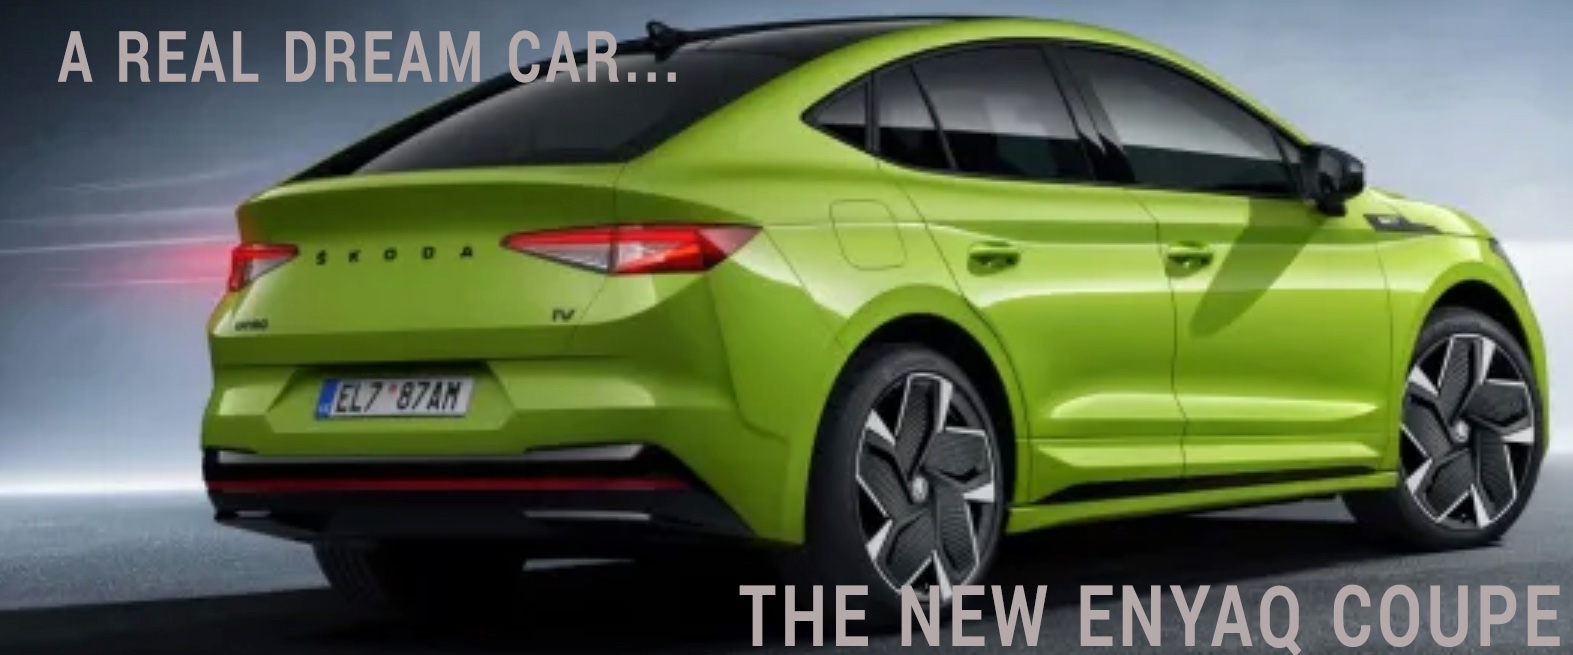 The New Enyaq Coupe